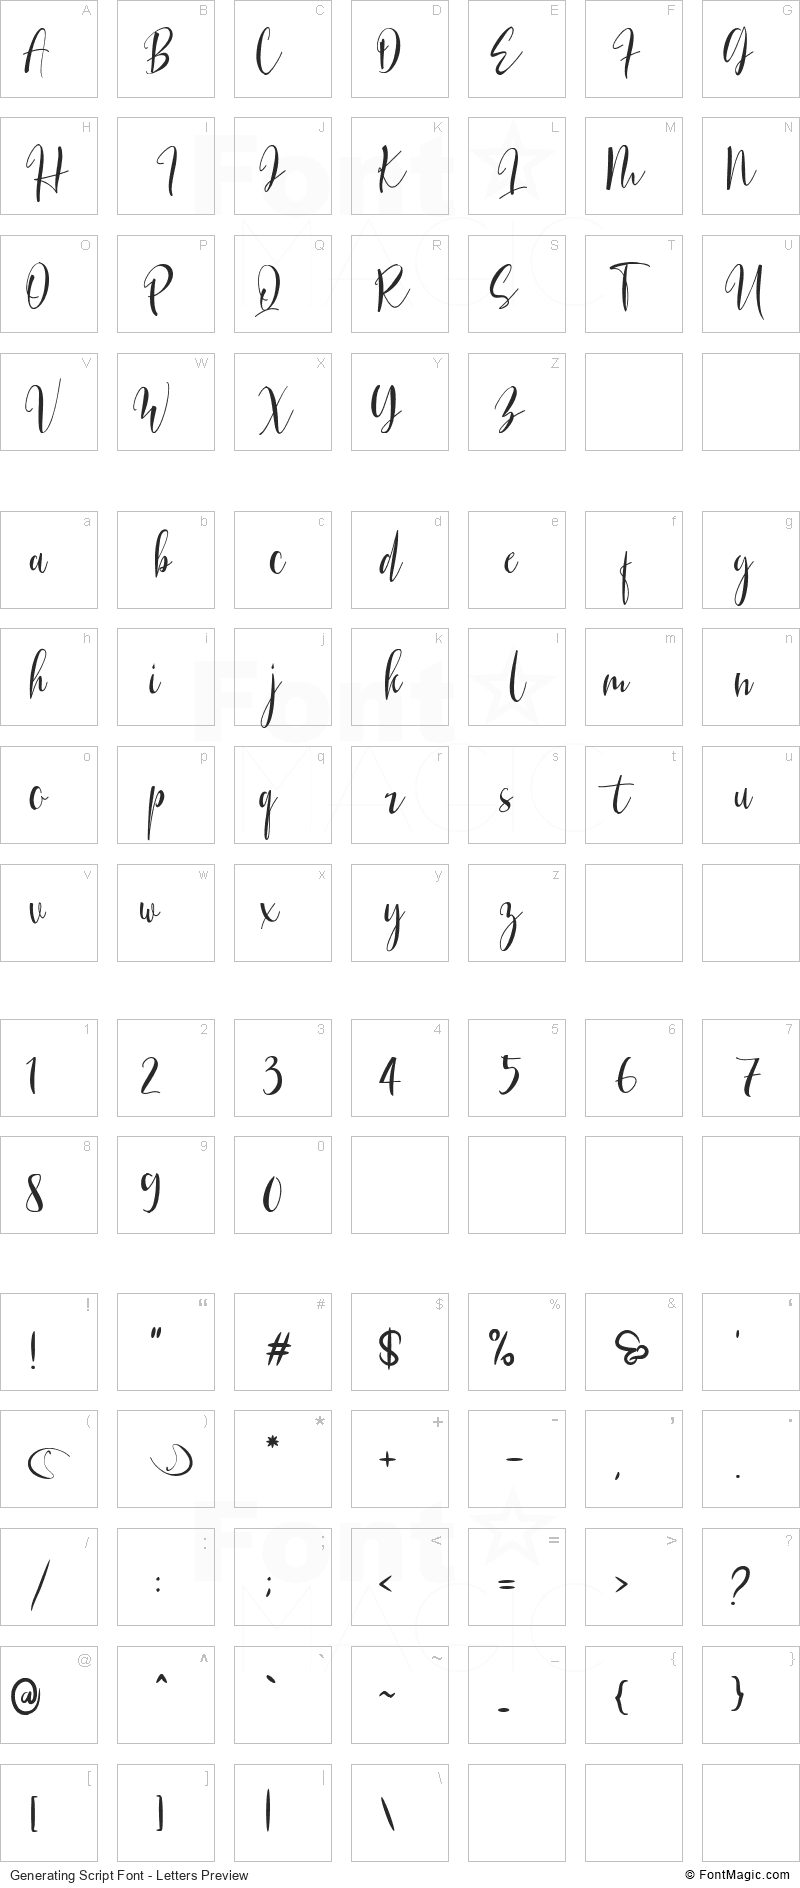 Generating Script Font - All Latters Preview Chart